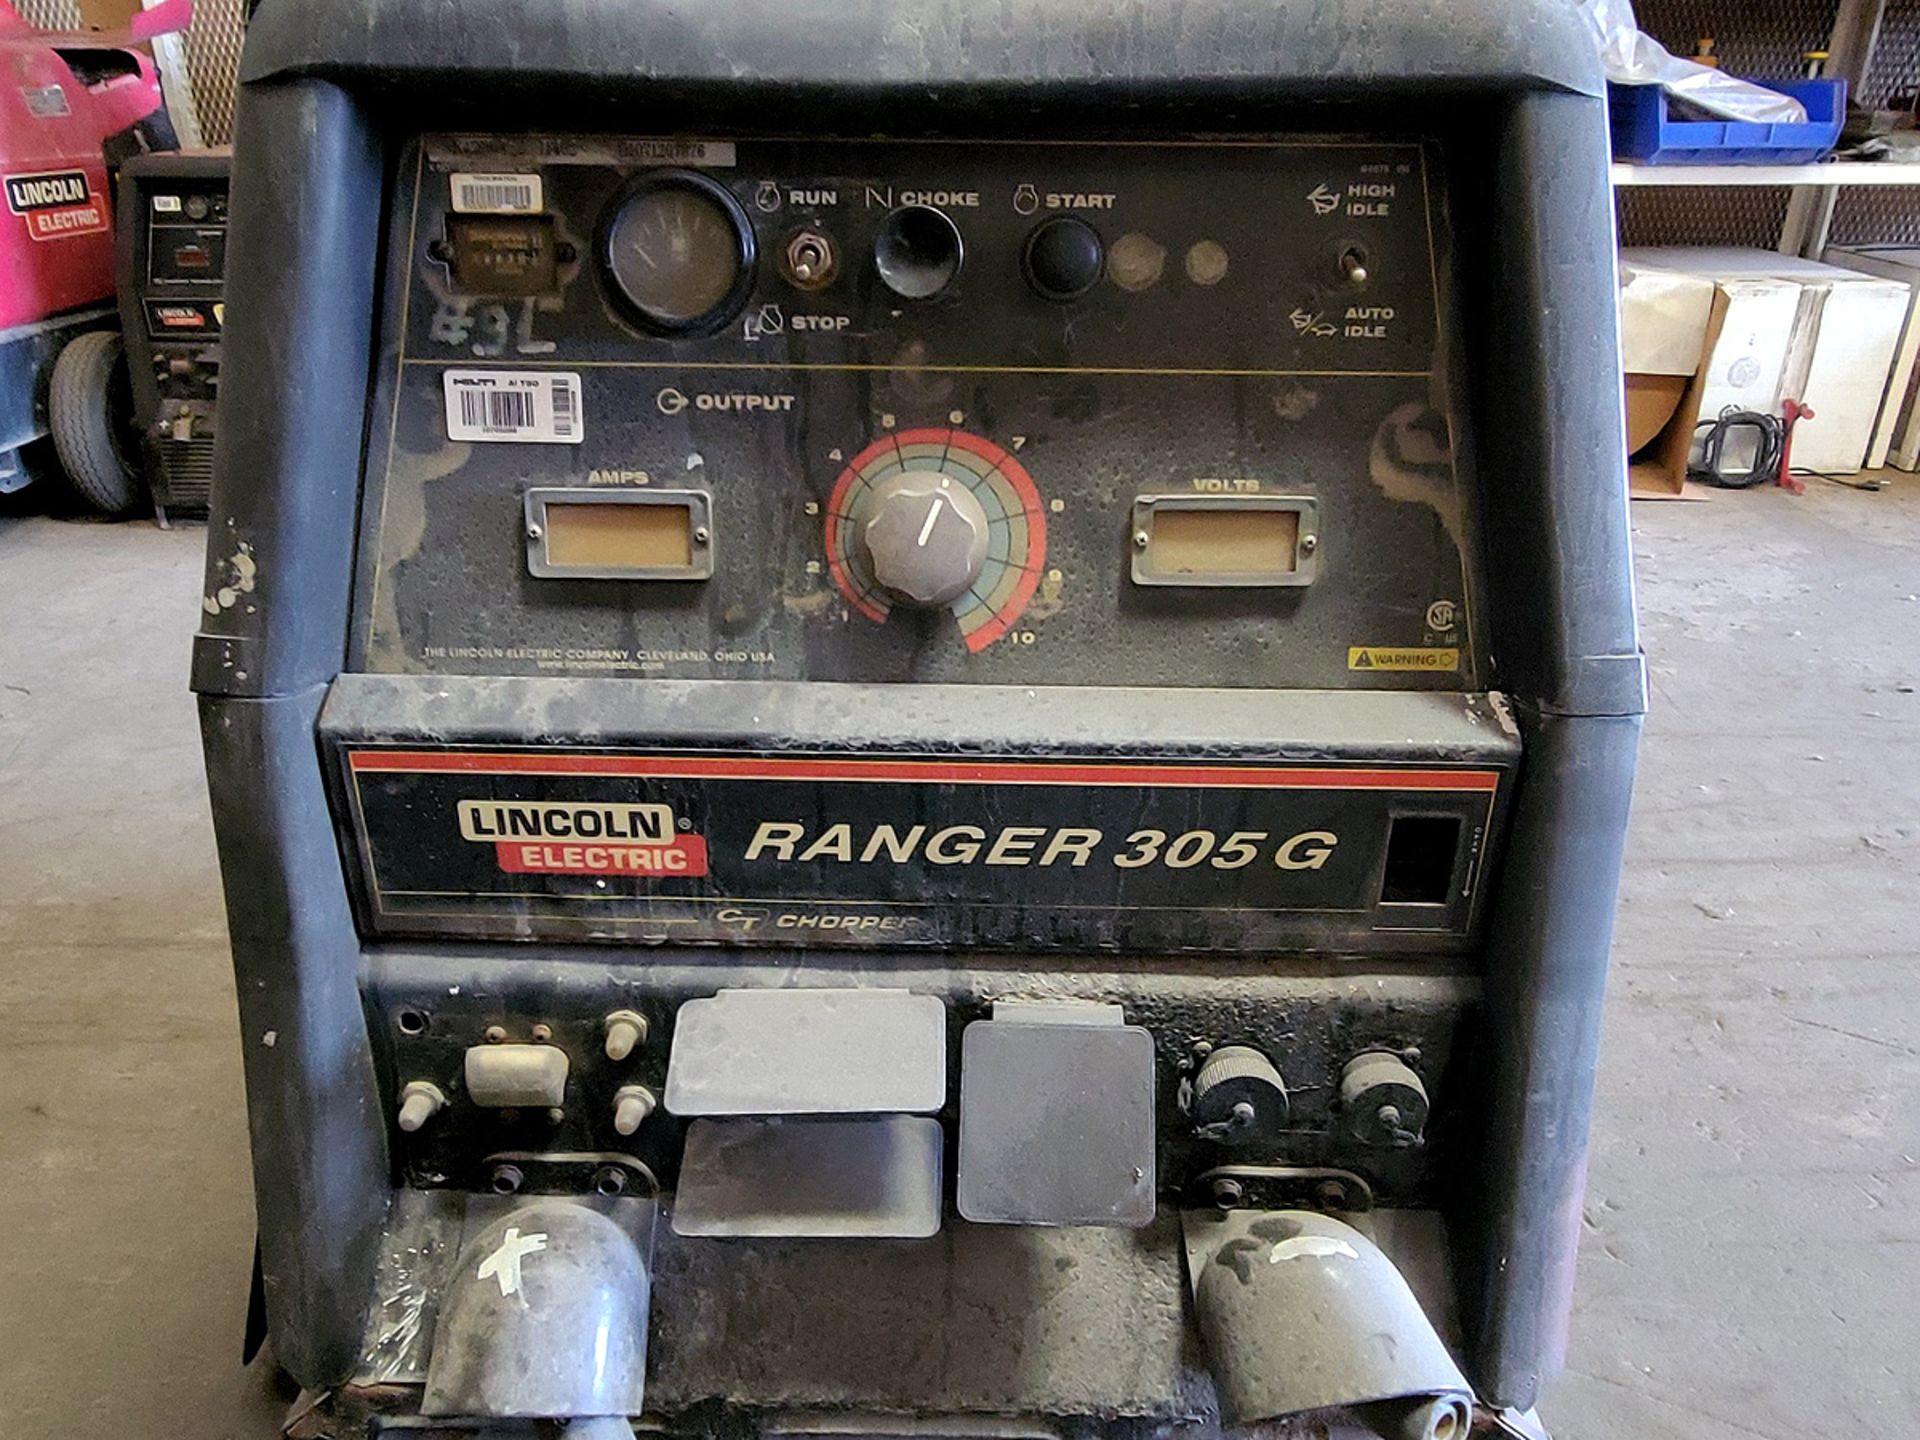 Lincoln Ranger 305 G Engine Driven Welder Mounted on Portable Cart - Image 3 of 6